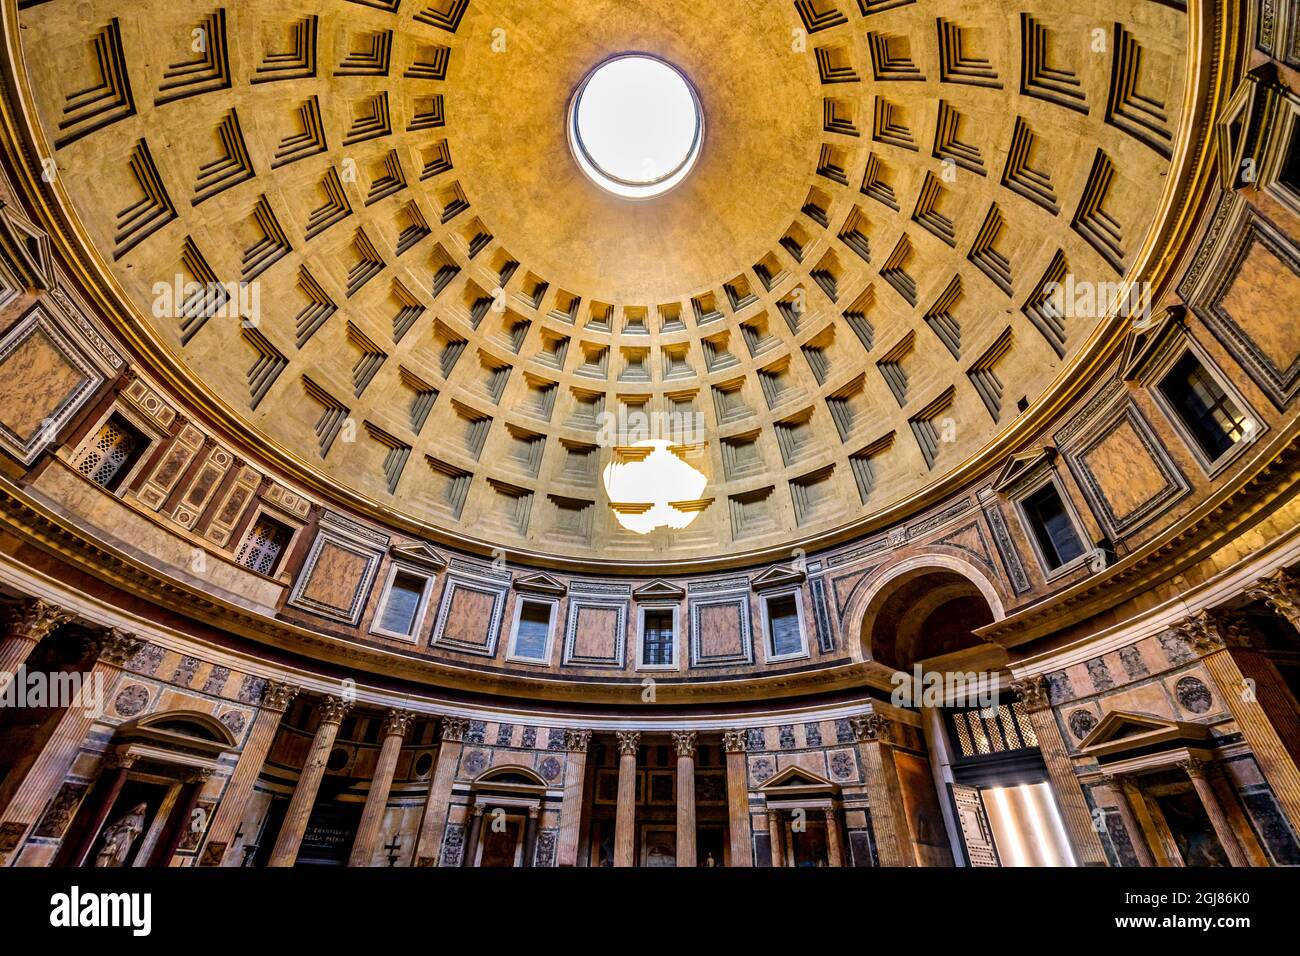 Dome Oculus Pantheon, Rome, Italy. Rebuilt by Hadrian in 118 to 125 AD  Became oldest Roman church in 609 AD. Oculus, hole, provides only light  Stock Photo - Alamy